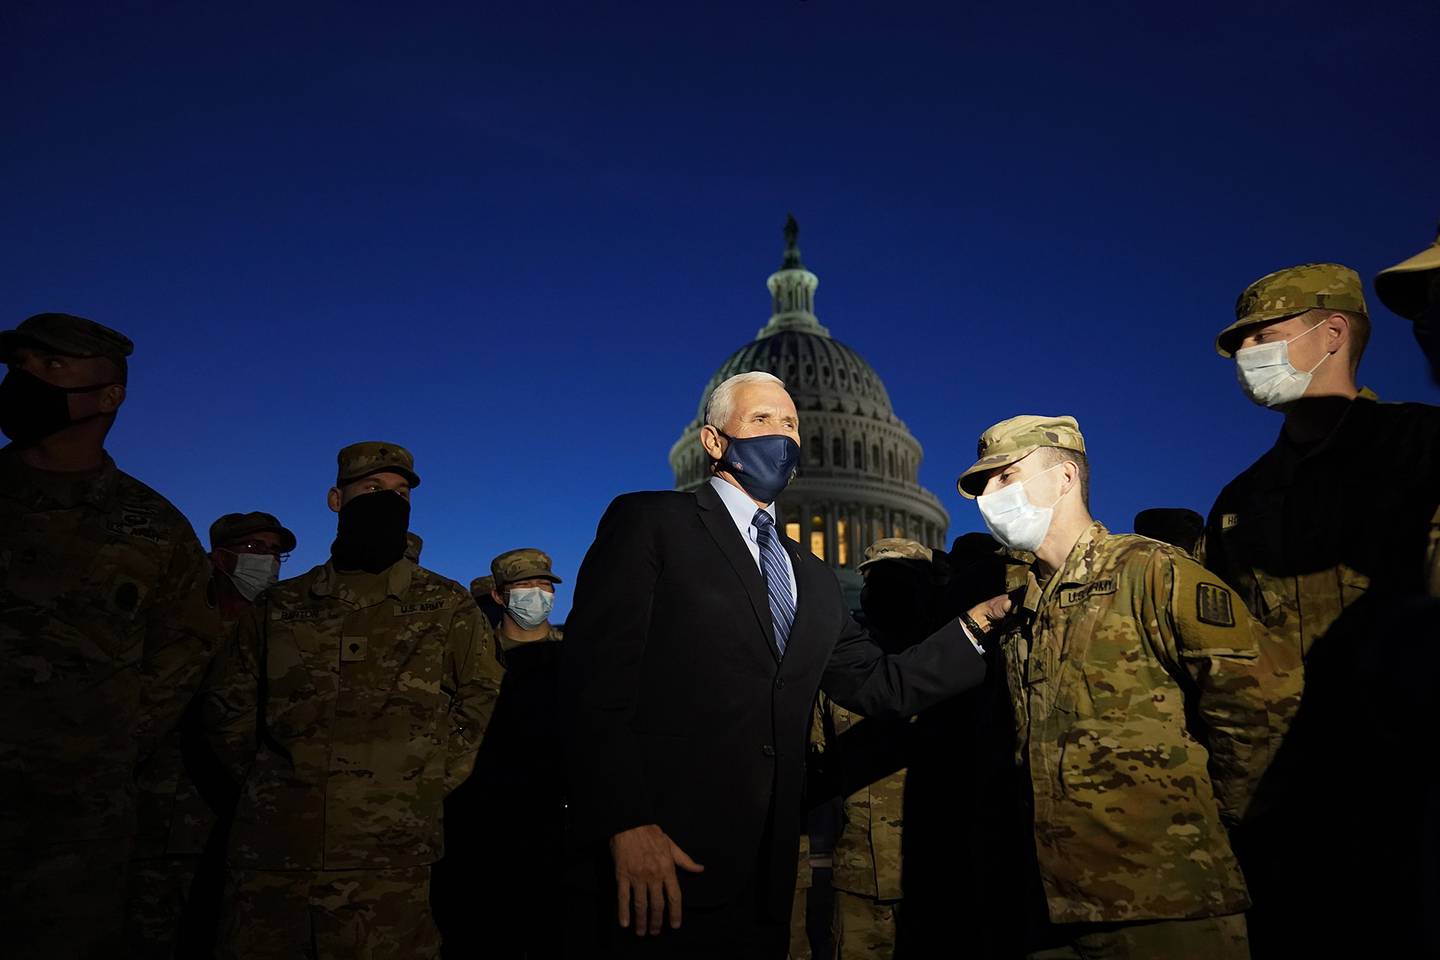 Vice President Mike Pence speaks to National Guard troops outside the U.S. Capitol, Thursday, Jan. 14, 2021, in Washington.